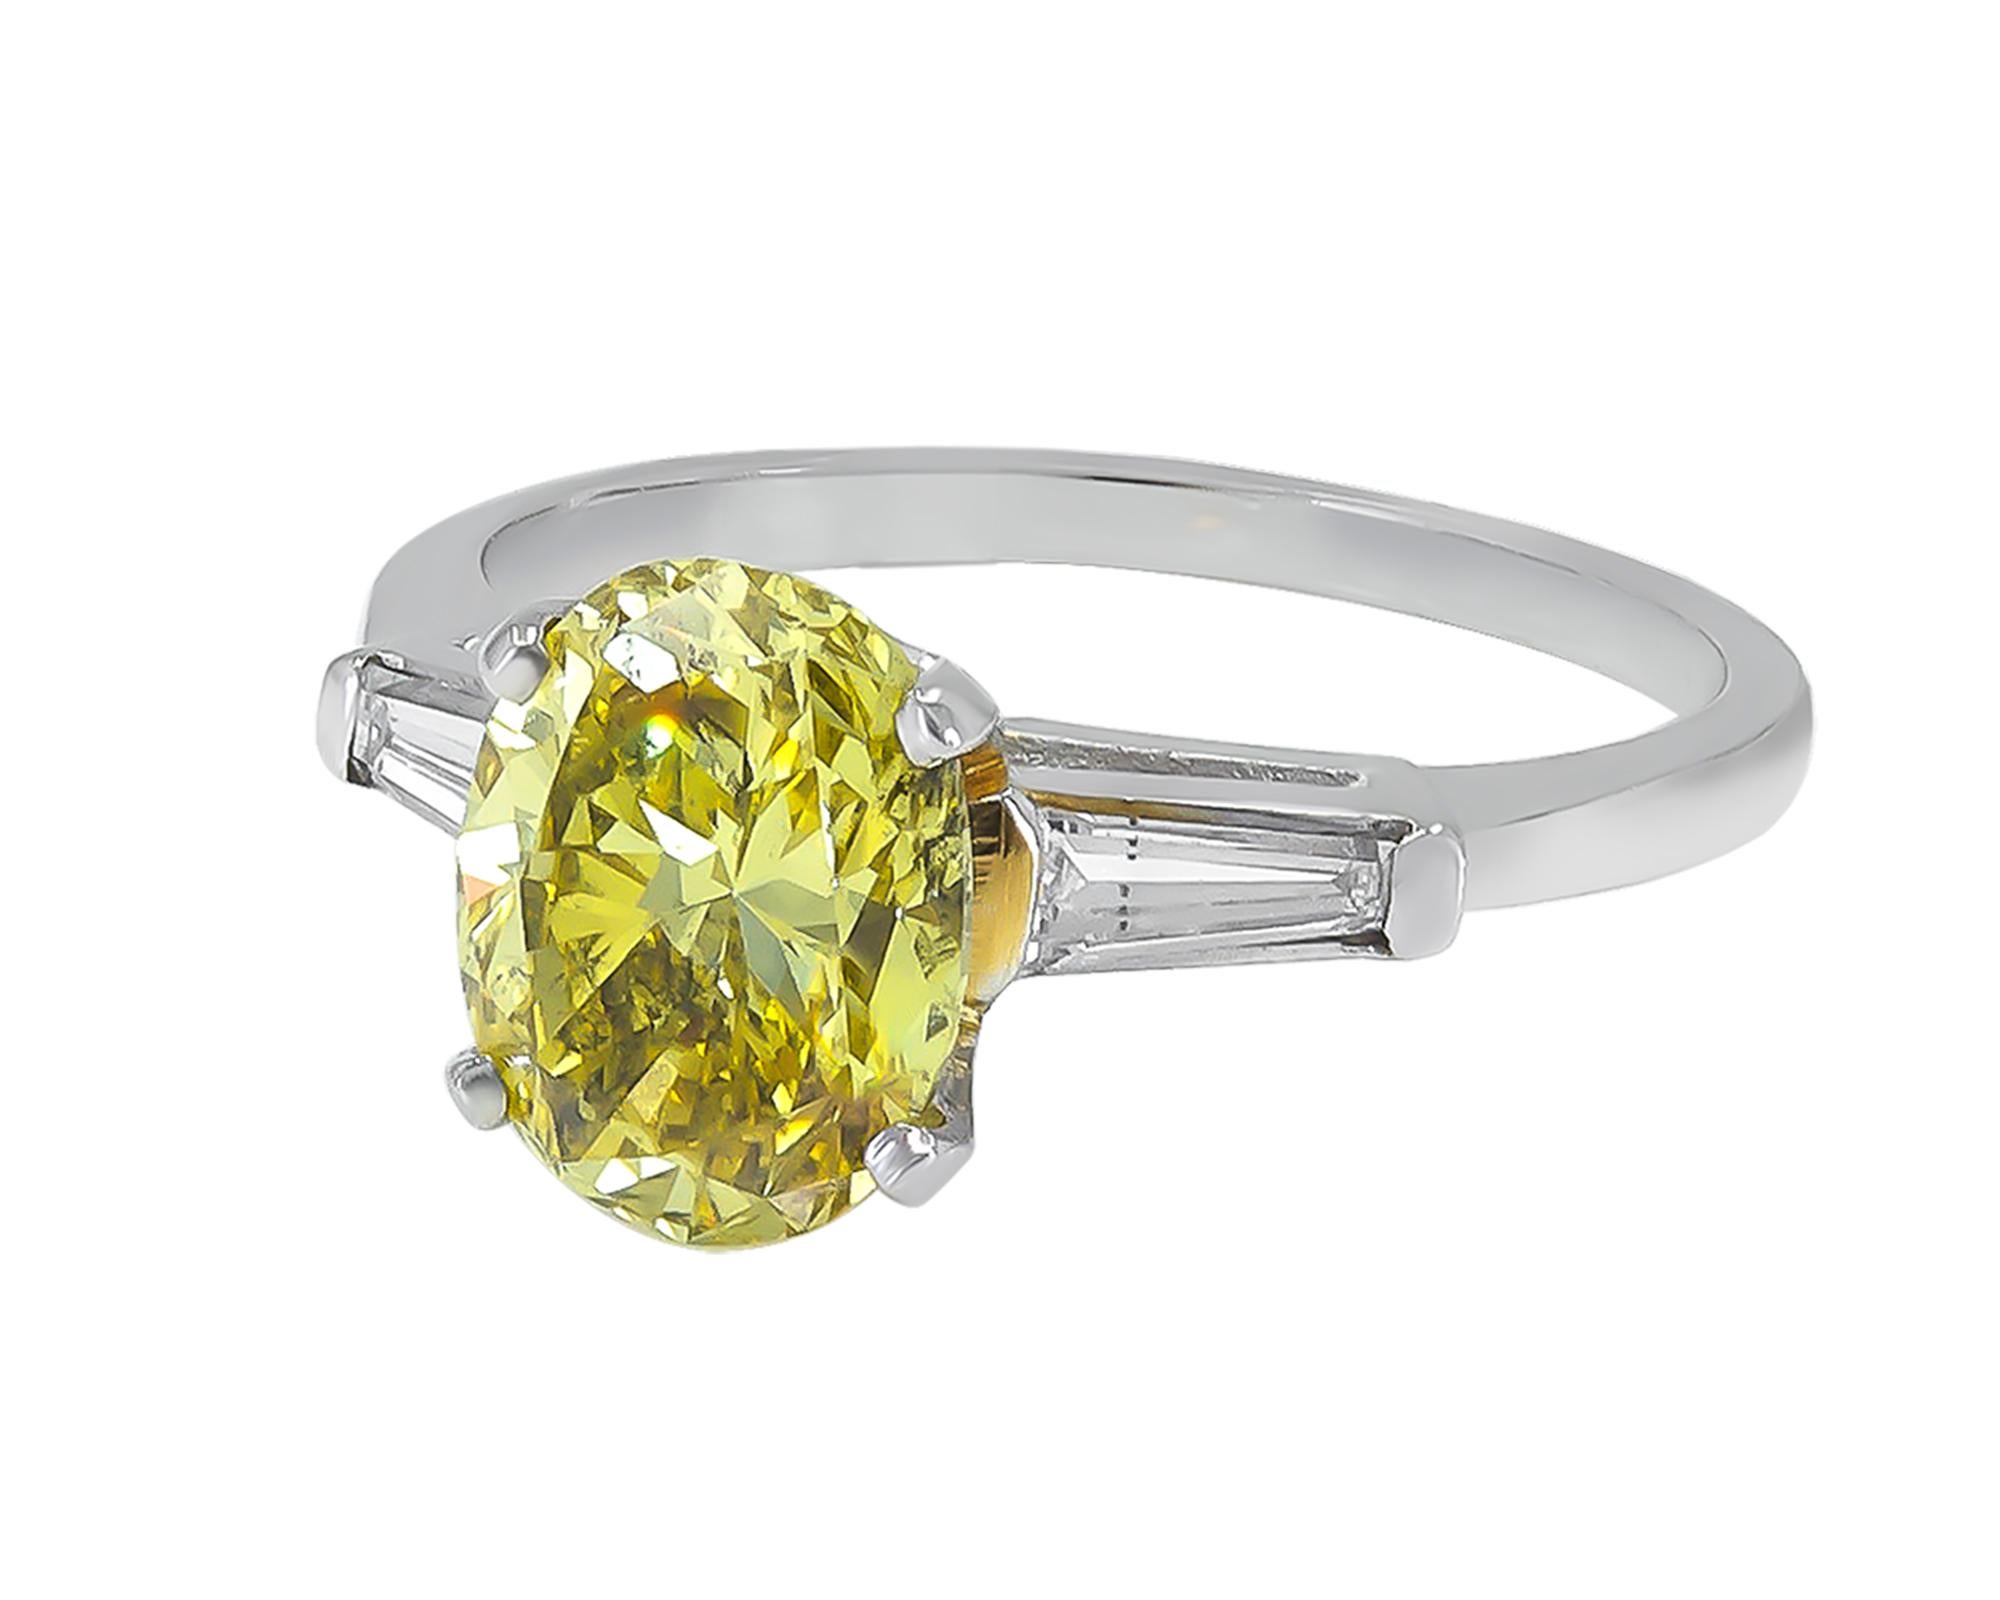 A classic engagement ring featuring a 2.14 carat oval fancy vivid yellow diamond with SI2 clarity.
The yellow diamond is accompanied by a GIA report.
There are 2 baguette diamonds on the sides weighing 0.65 carats.
The metal is platinum weighing